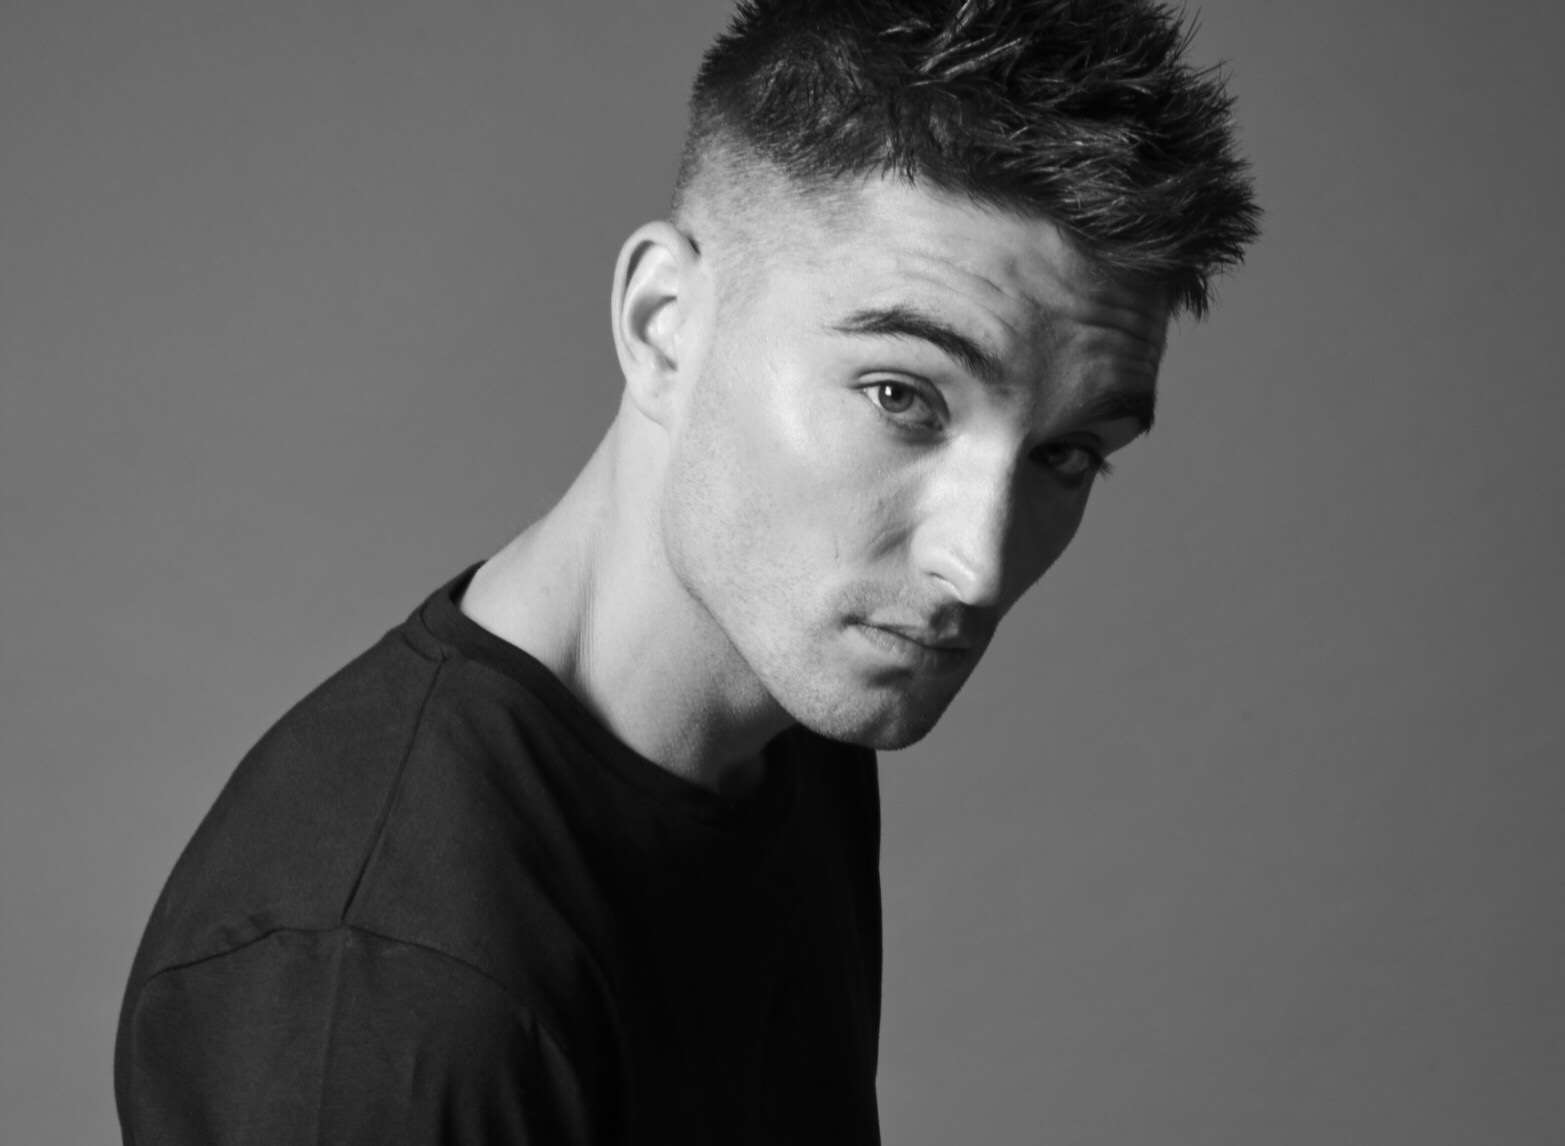 Tom Parker from The Wanted has taken part in the global campaign.